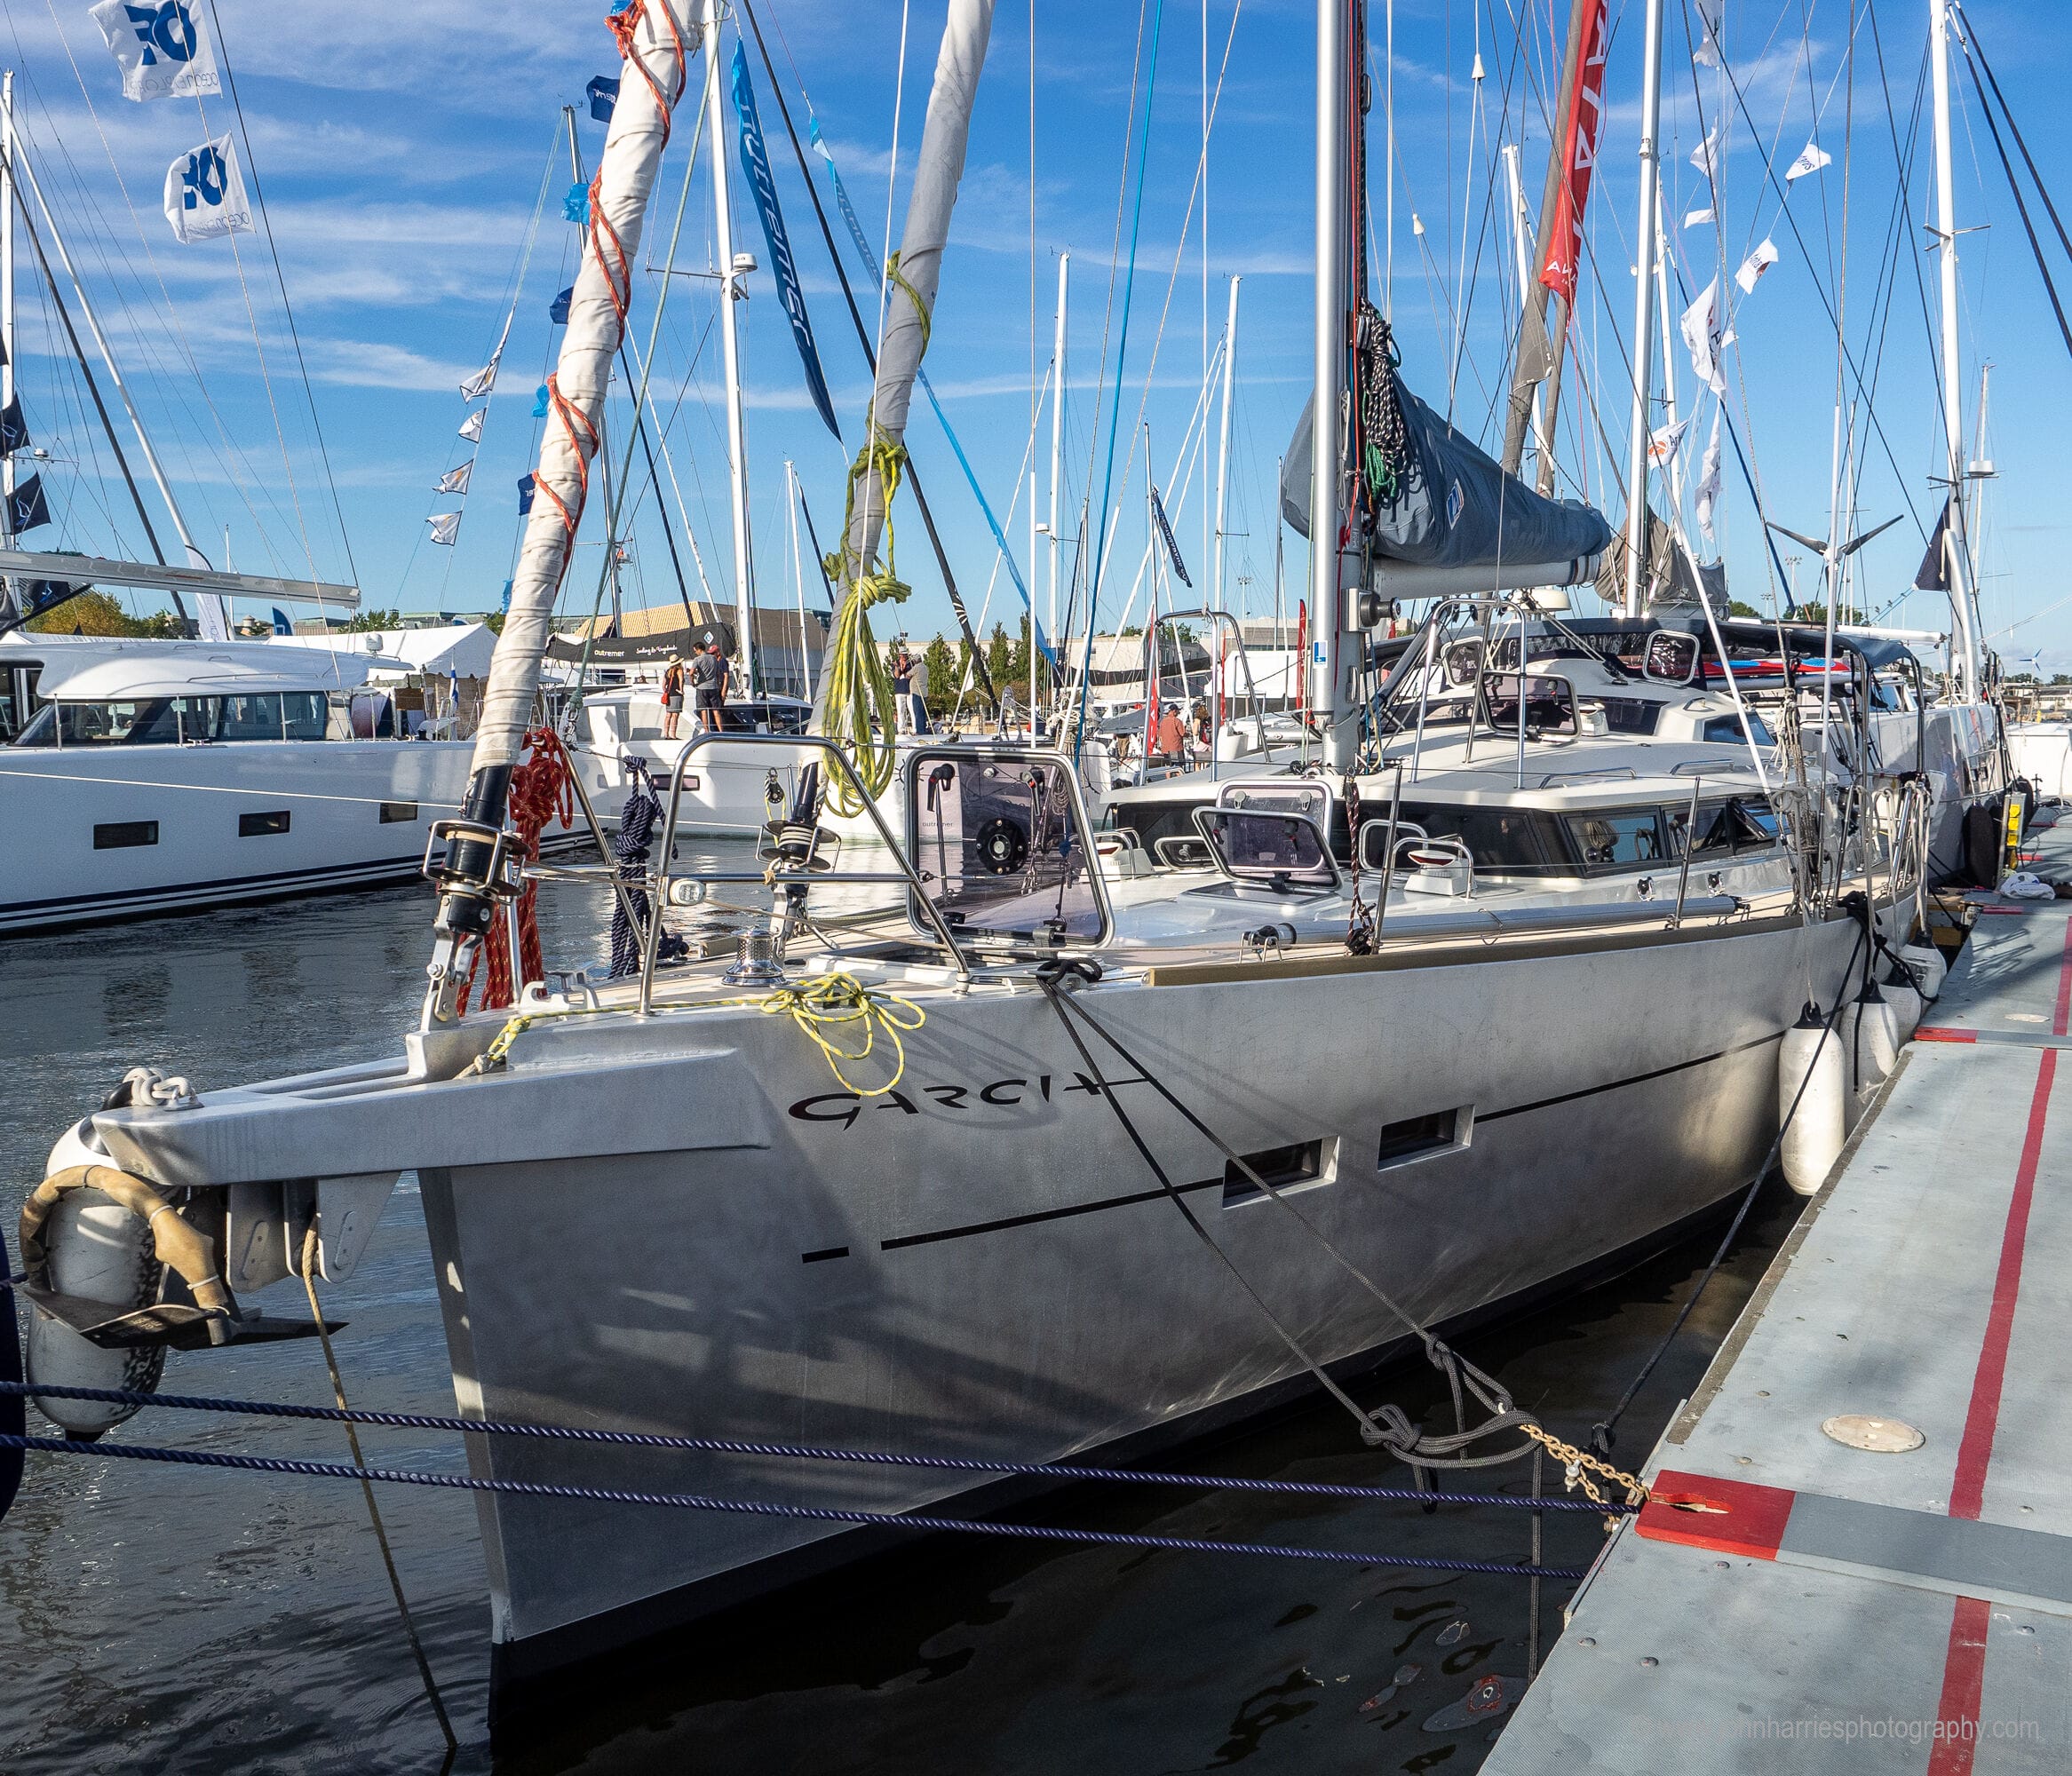 US Sailboat Show Report—Boats - Attainable Adventure Cruising